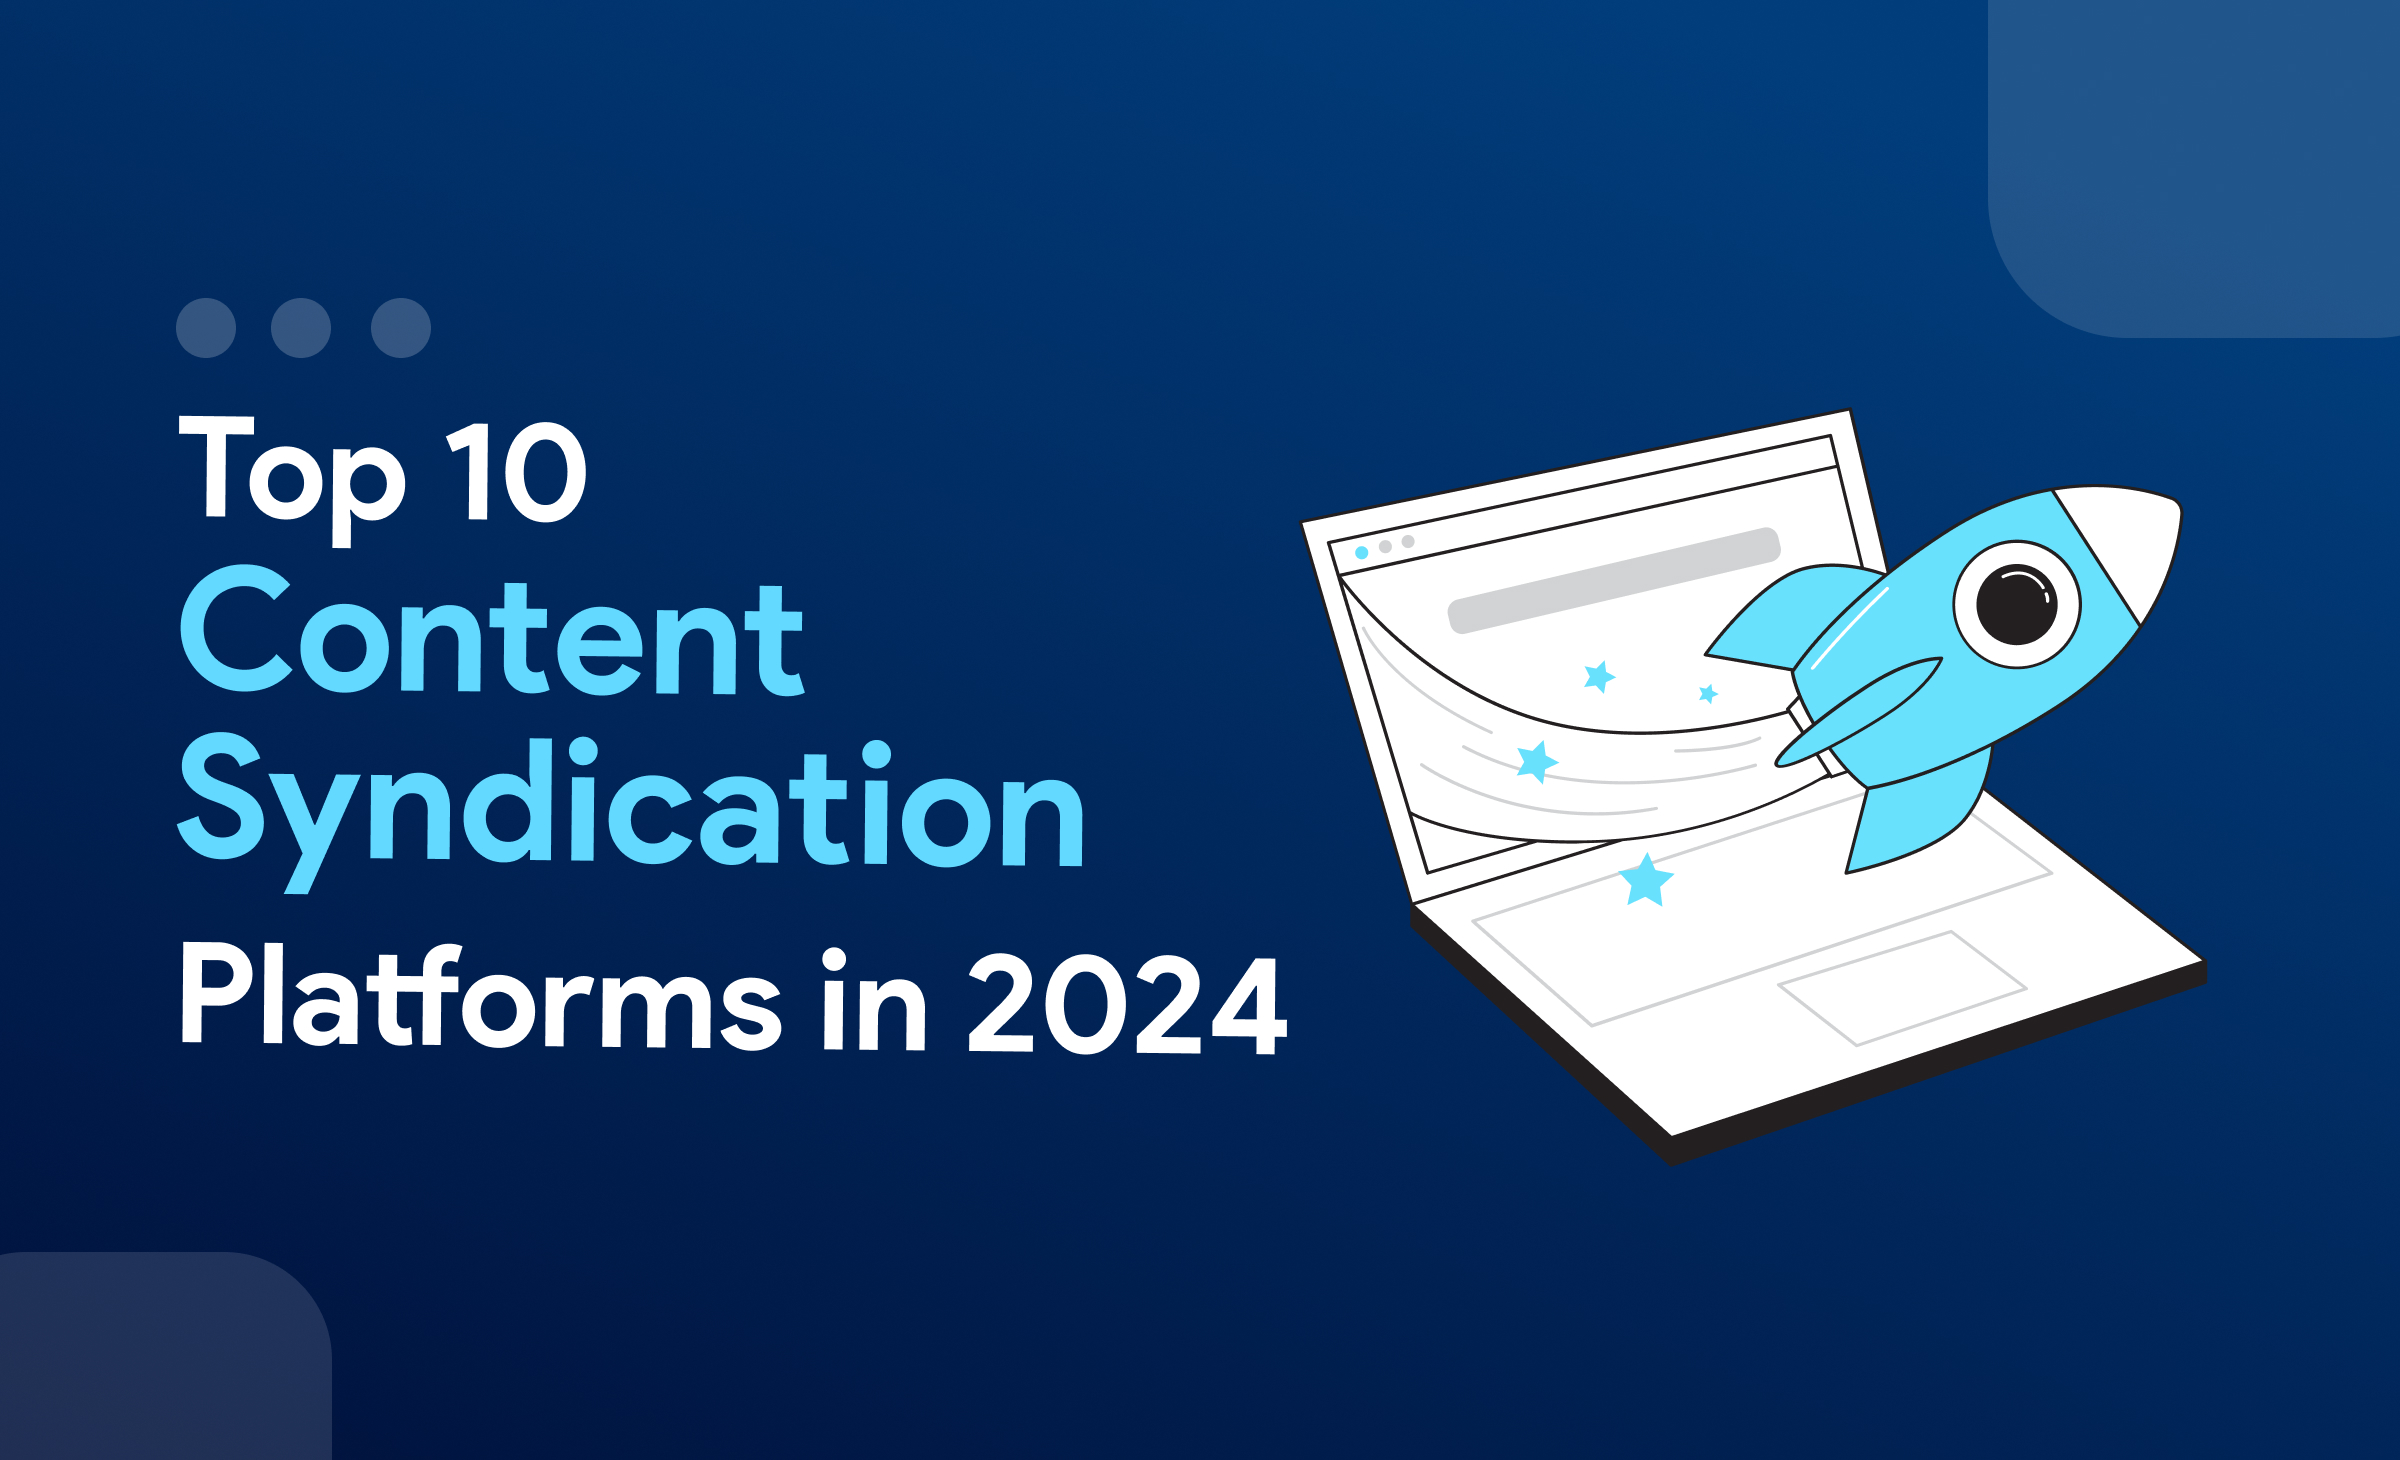 Top 10 Content Syndication Platforms in 2024